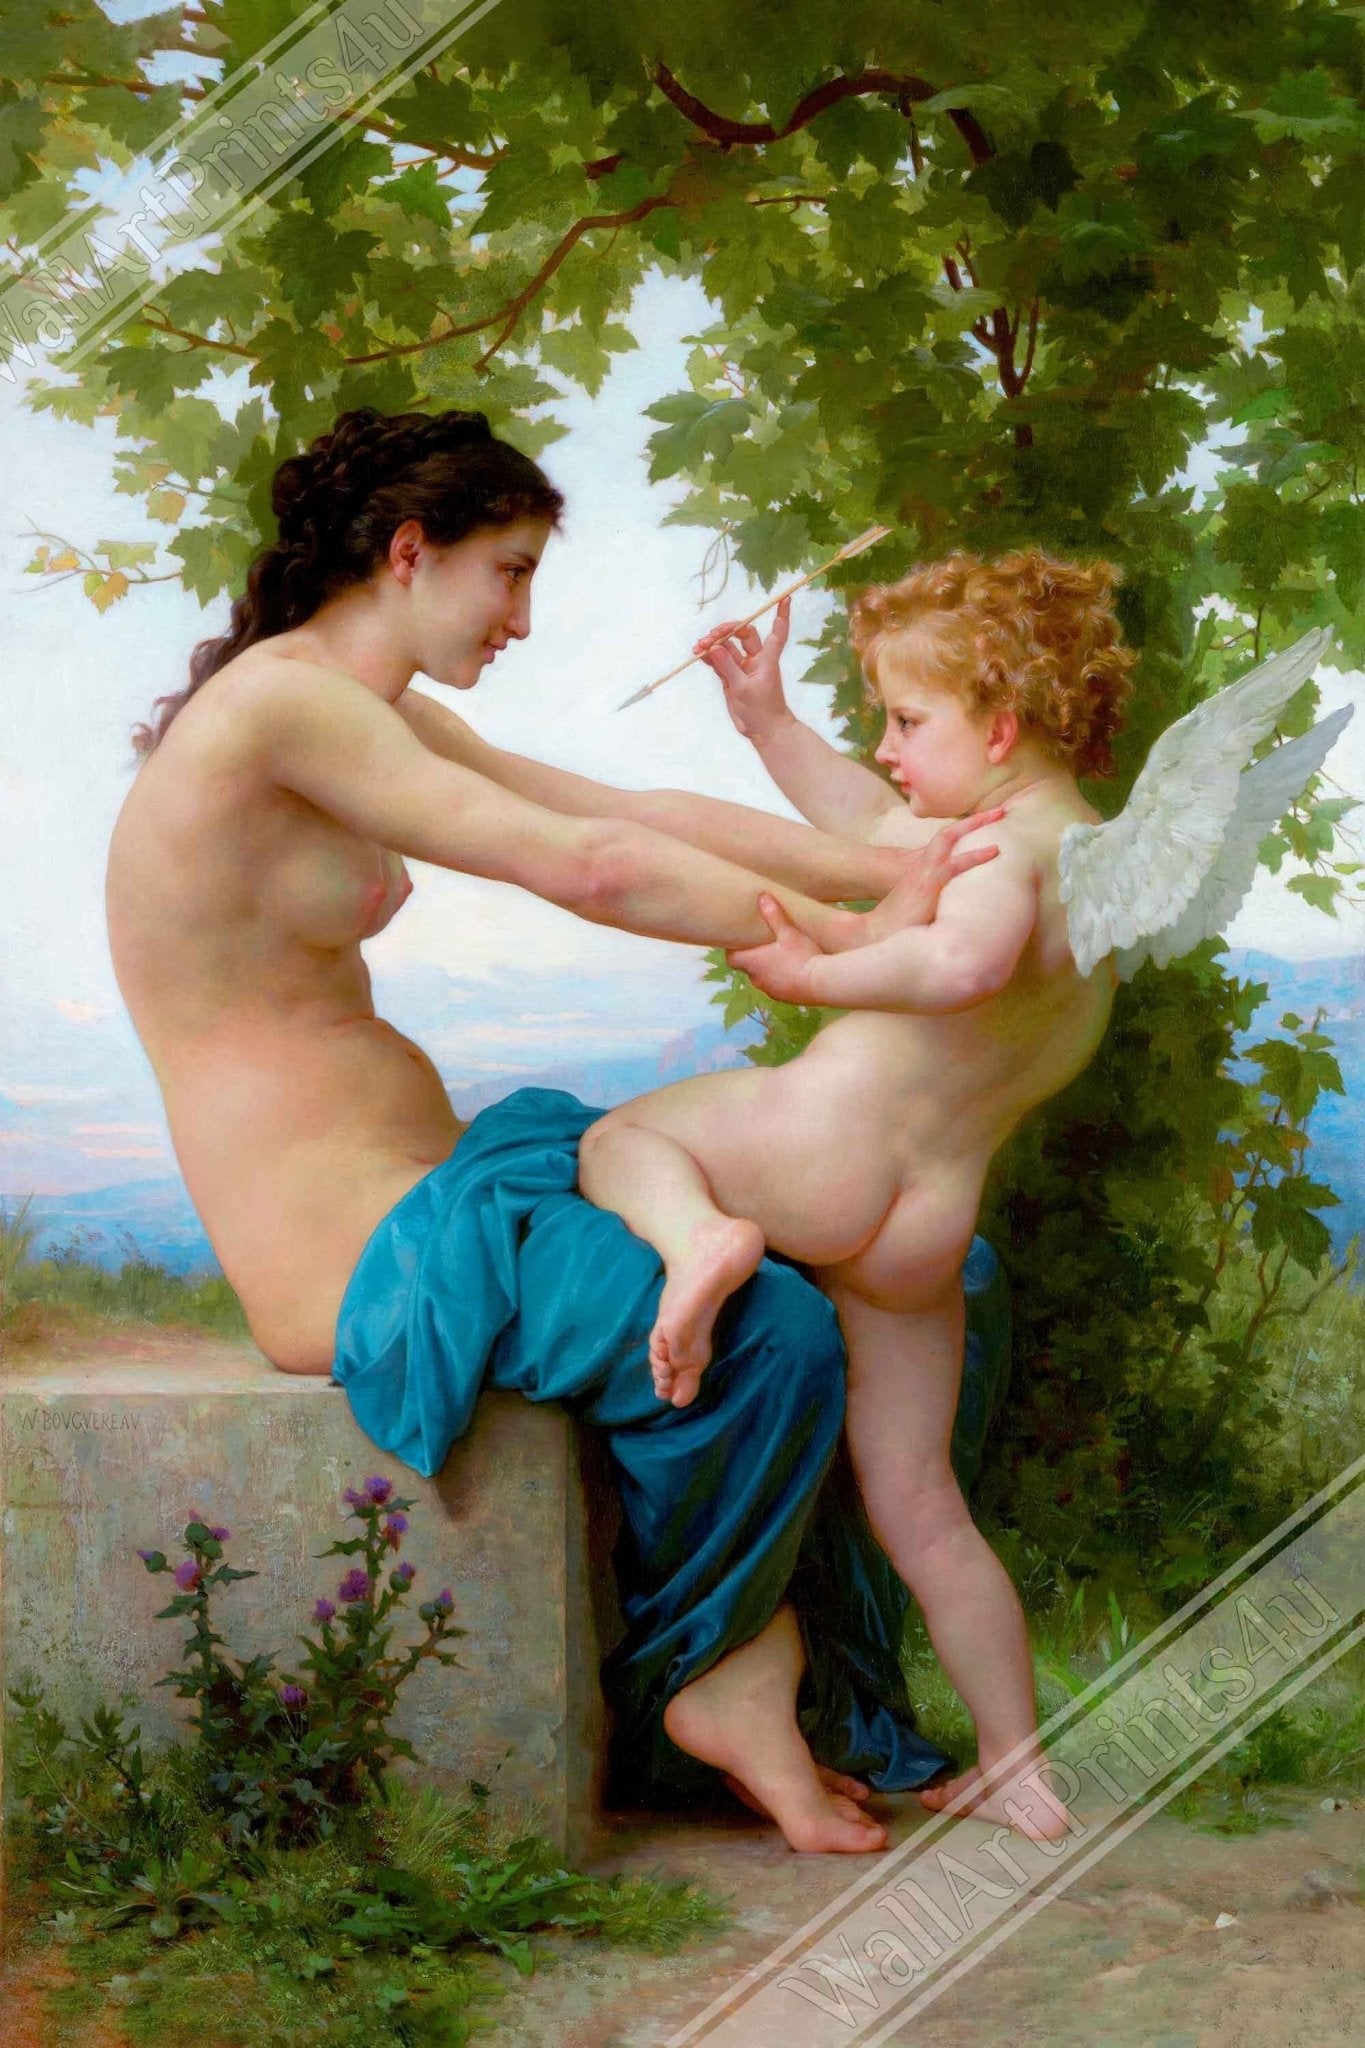 Cupid Eros Poster A Young Girl Defends Herself Against Cupid/Eros Poster Print William Bouguereau 1880 - WallArtPrints4U